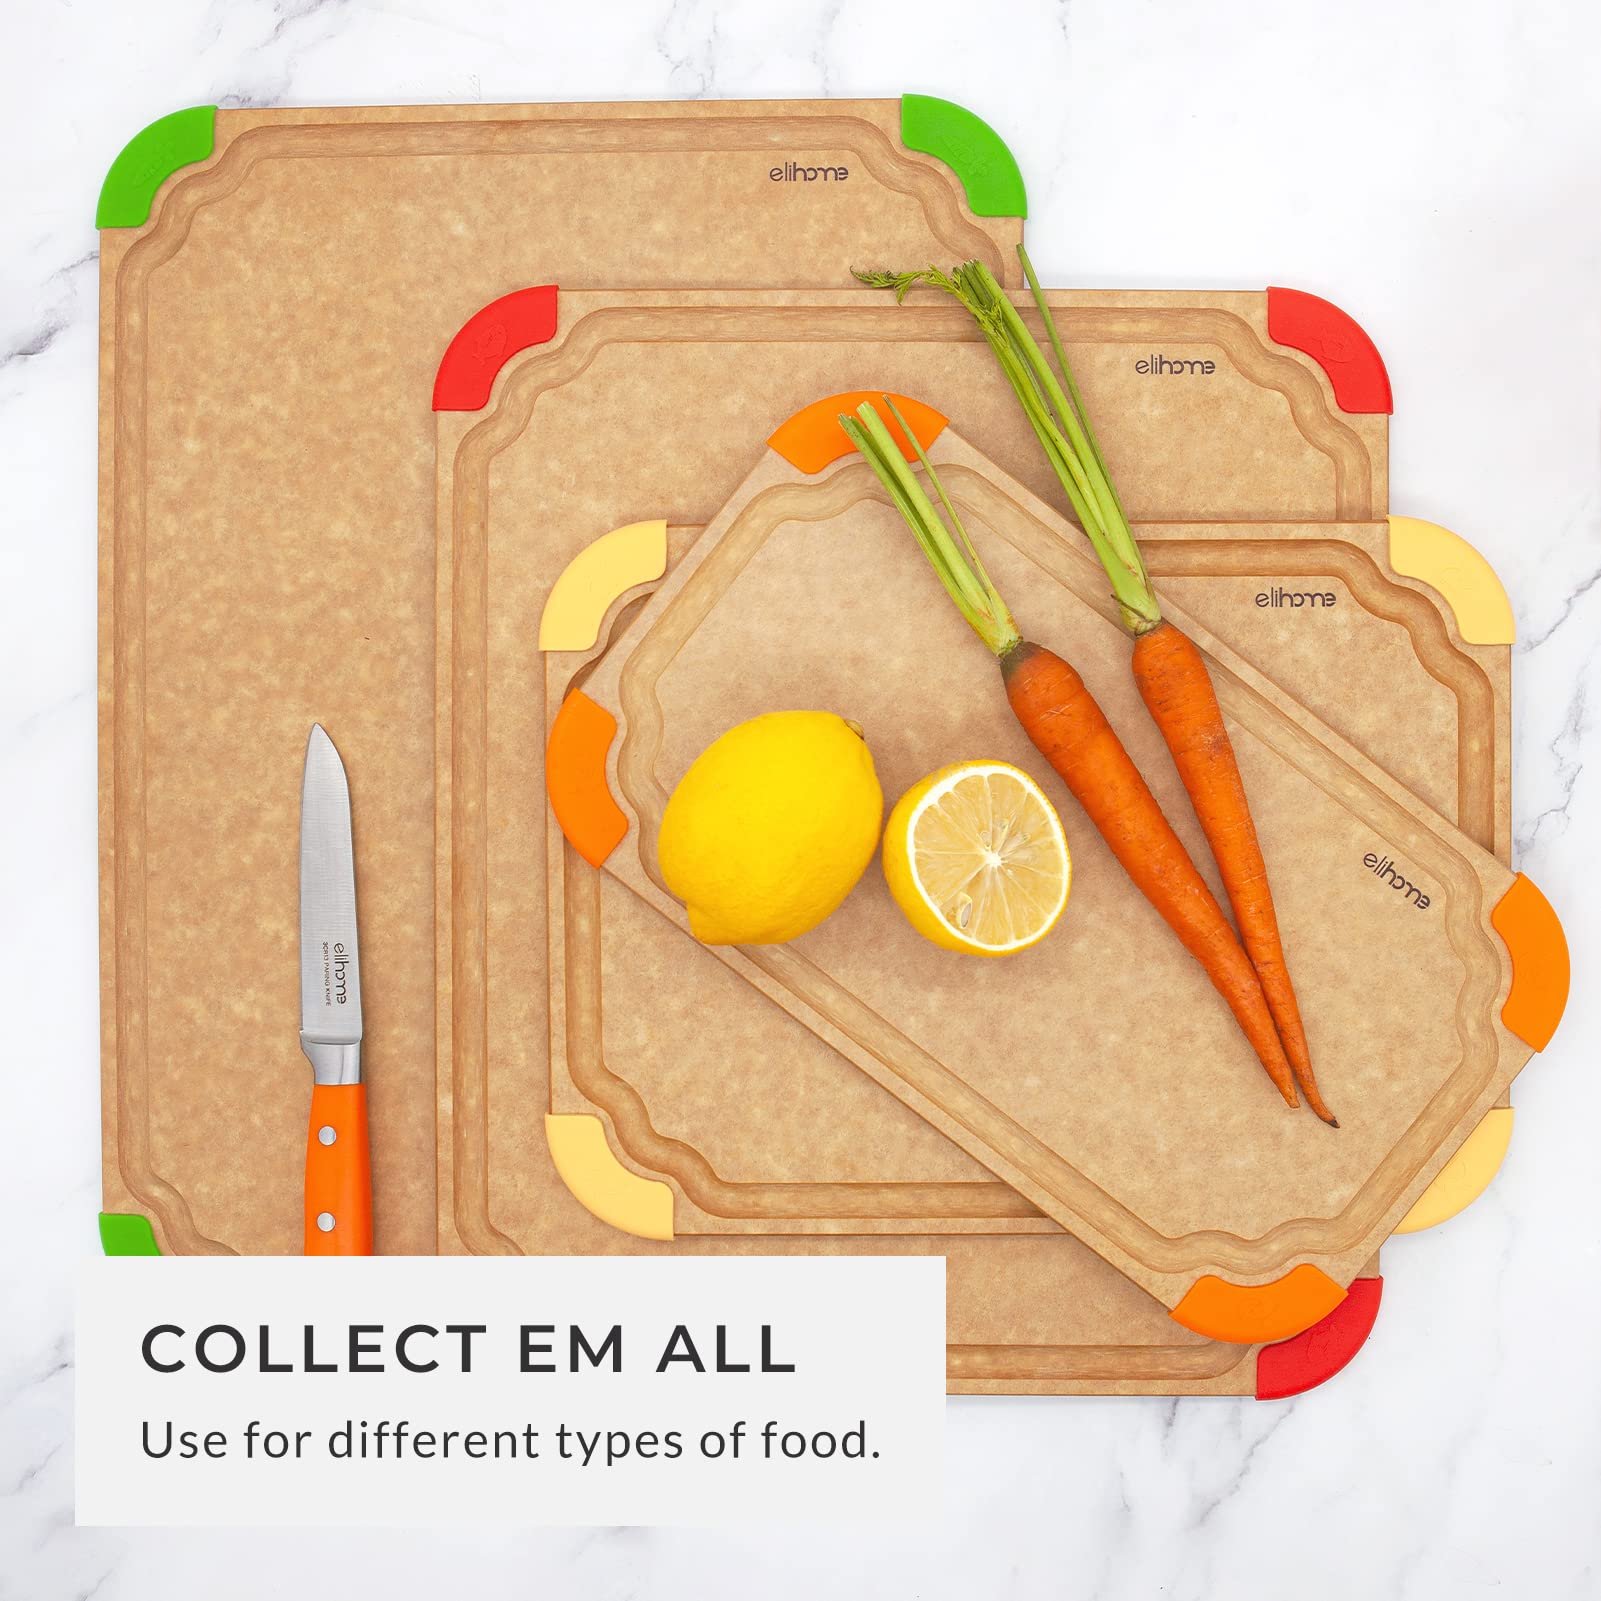 Elihome Index Color Coded Wood Fiber Dishwasher Safe Cutting board for Kitchen, Food Icon, Eco-Friendly, Juice Grooves, Non-Porous,Non-slip Feet,Reversible, BPA Free, Made in USA,Large & X Large